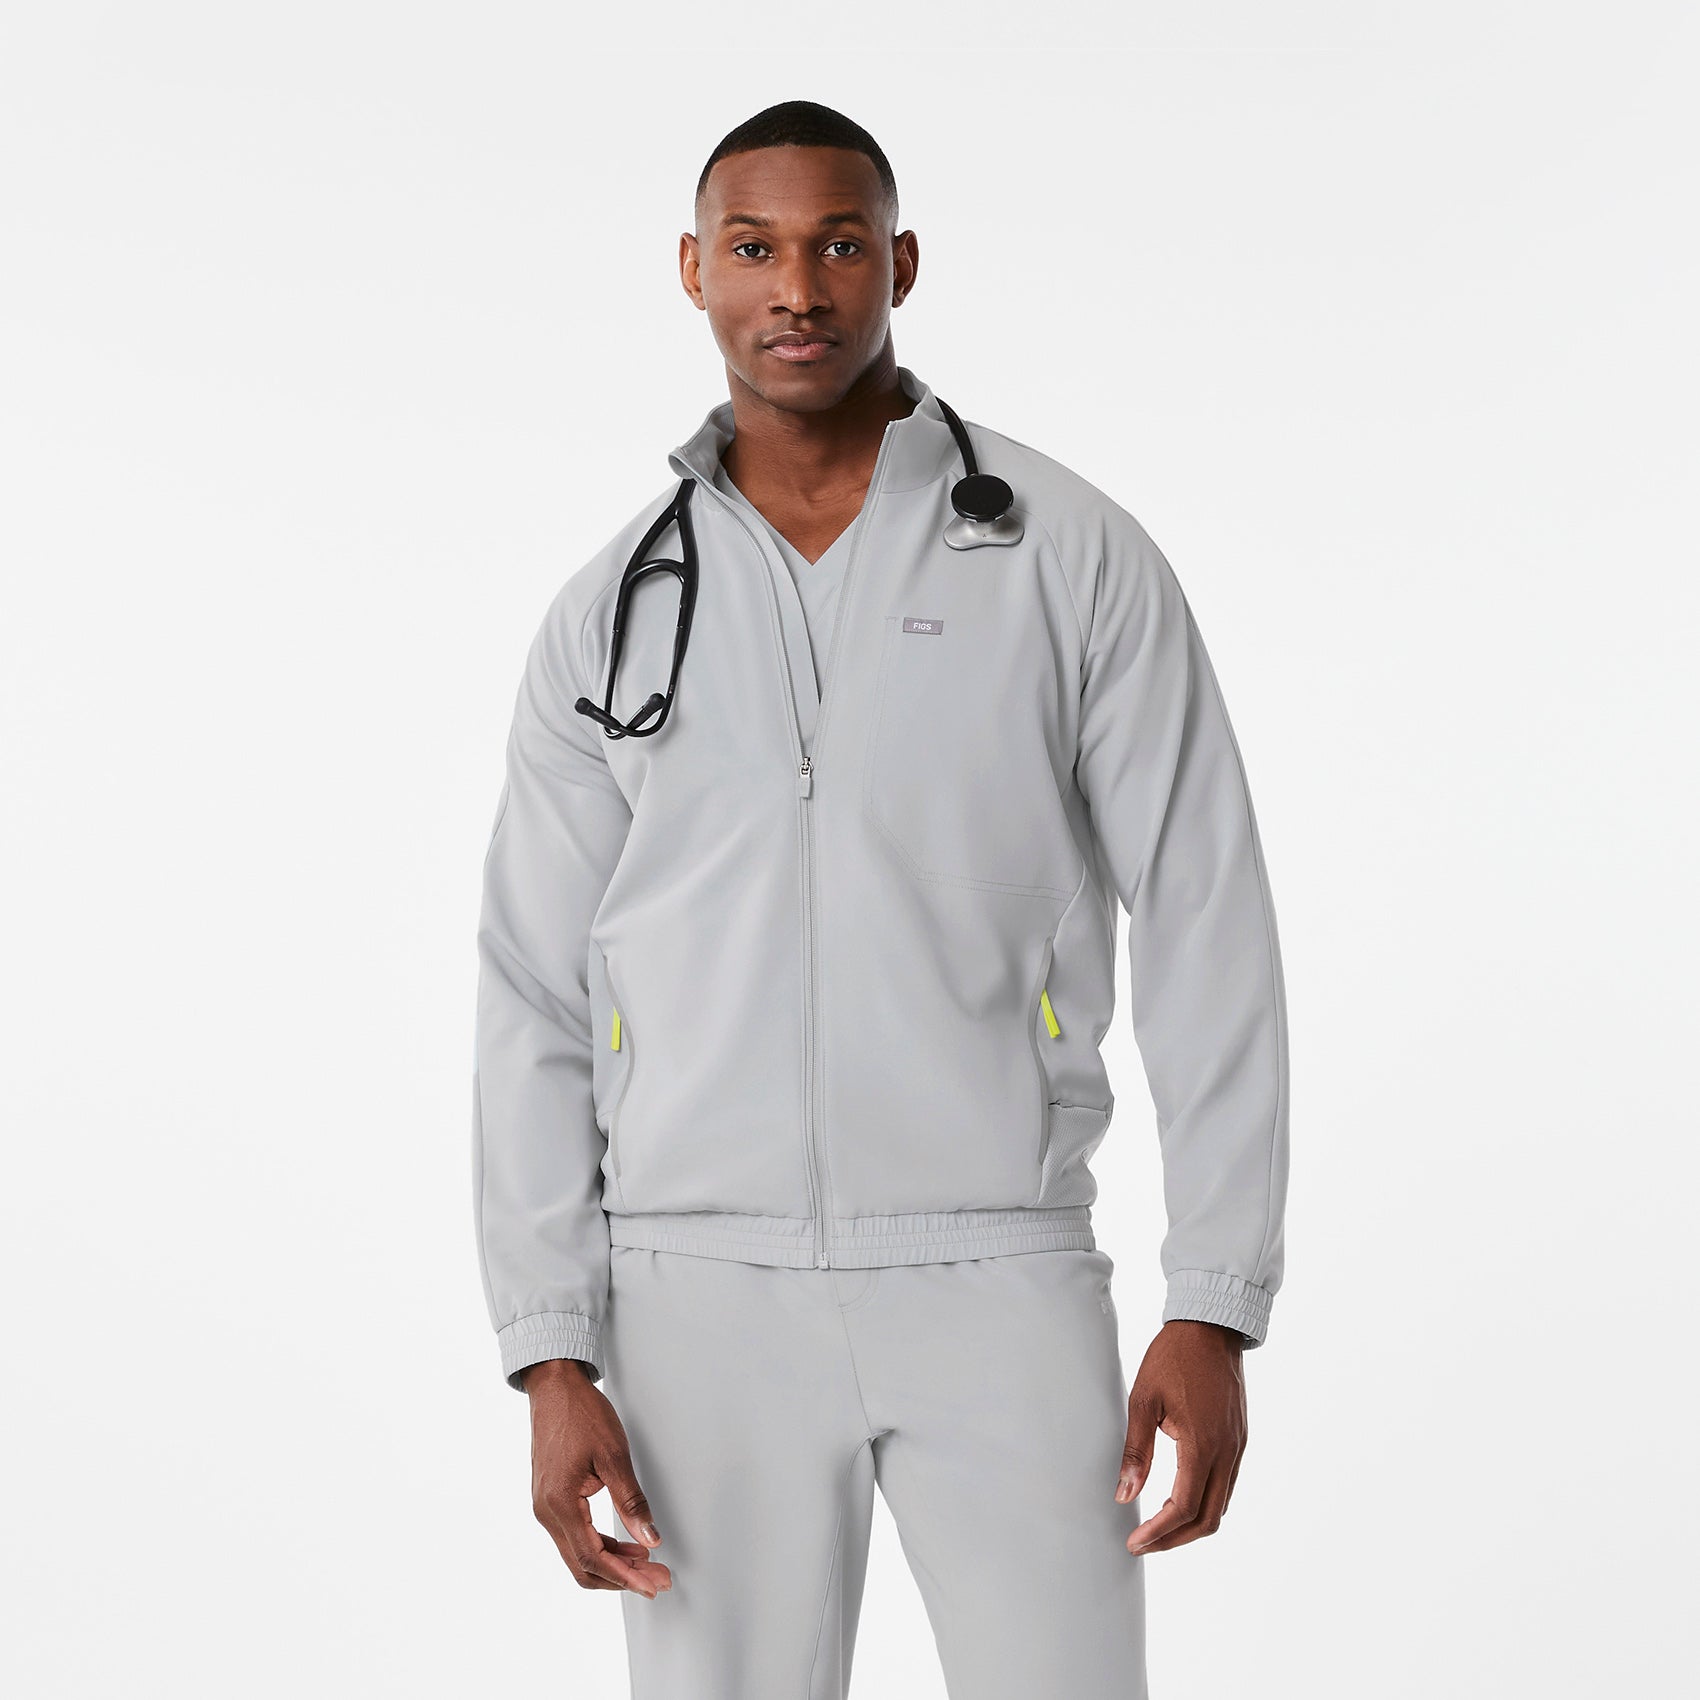 How Do FIGS Scrubs Fit? A Review - Silver Lining Scrubs — Silver